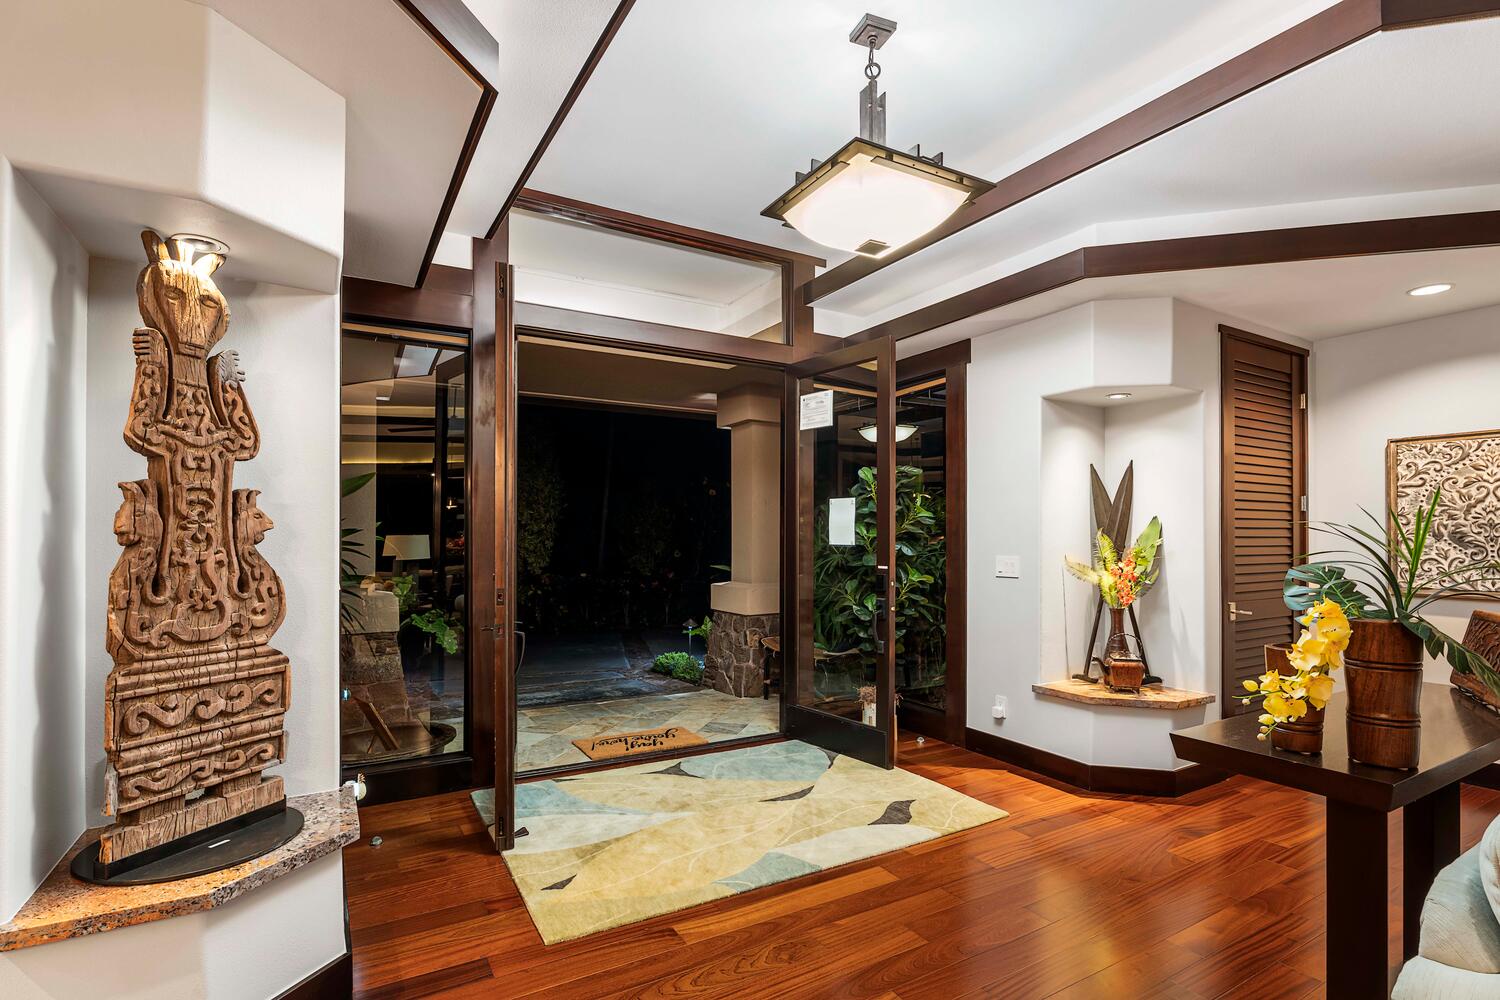 Kailua Kona Vacation Rentals, Island Oasis - Foyer of this magnificent home